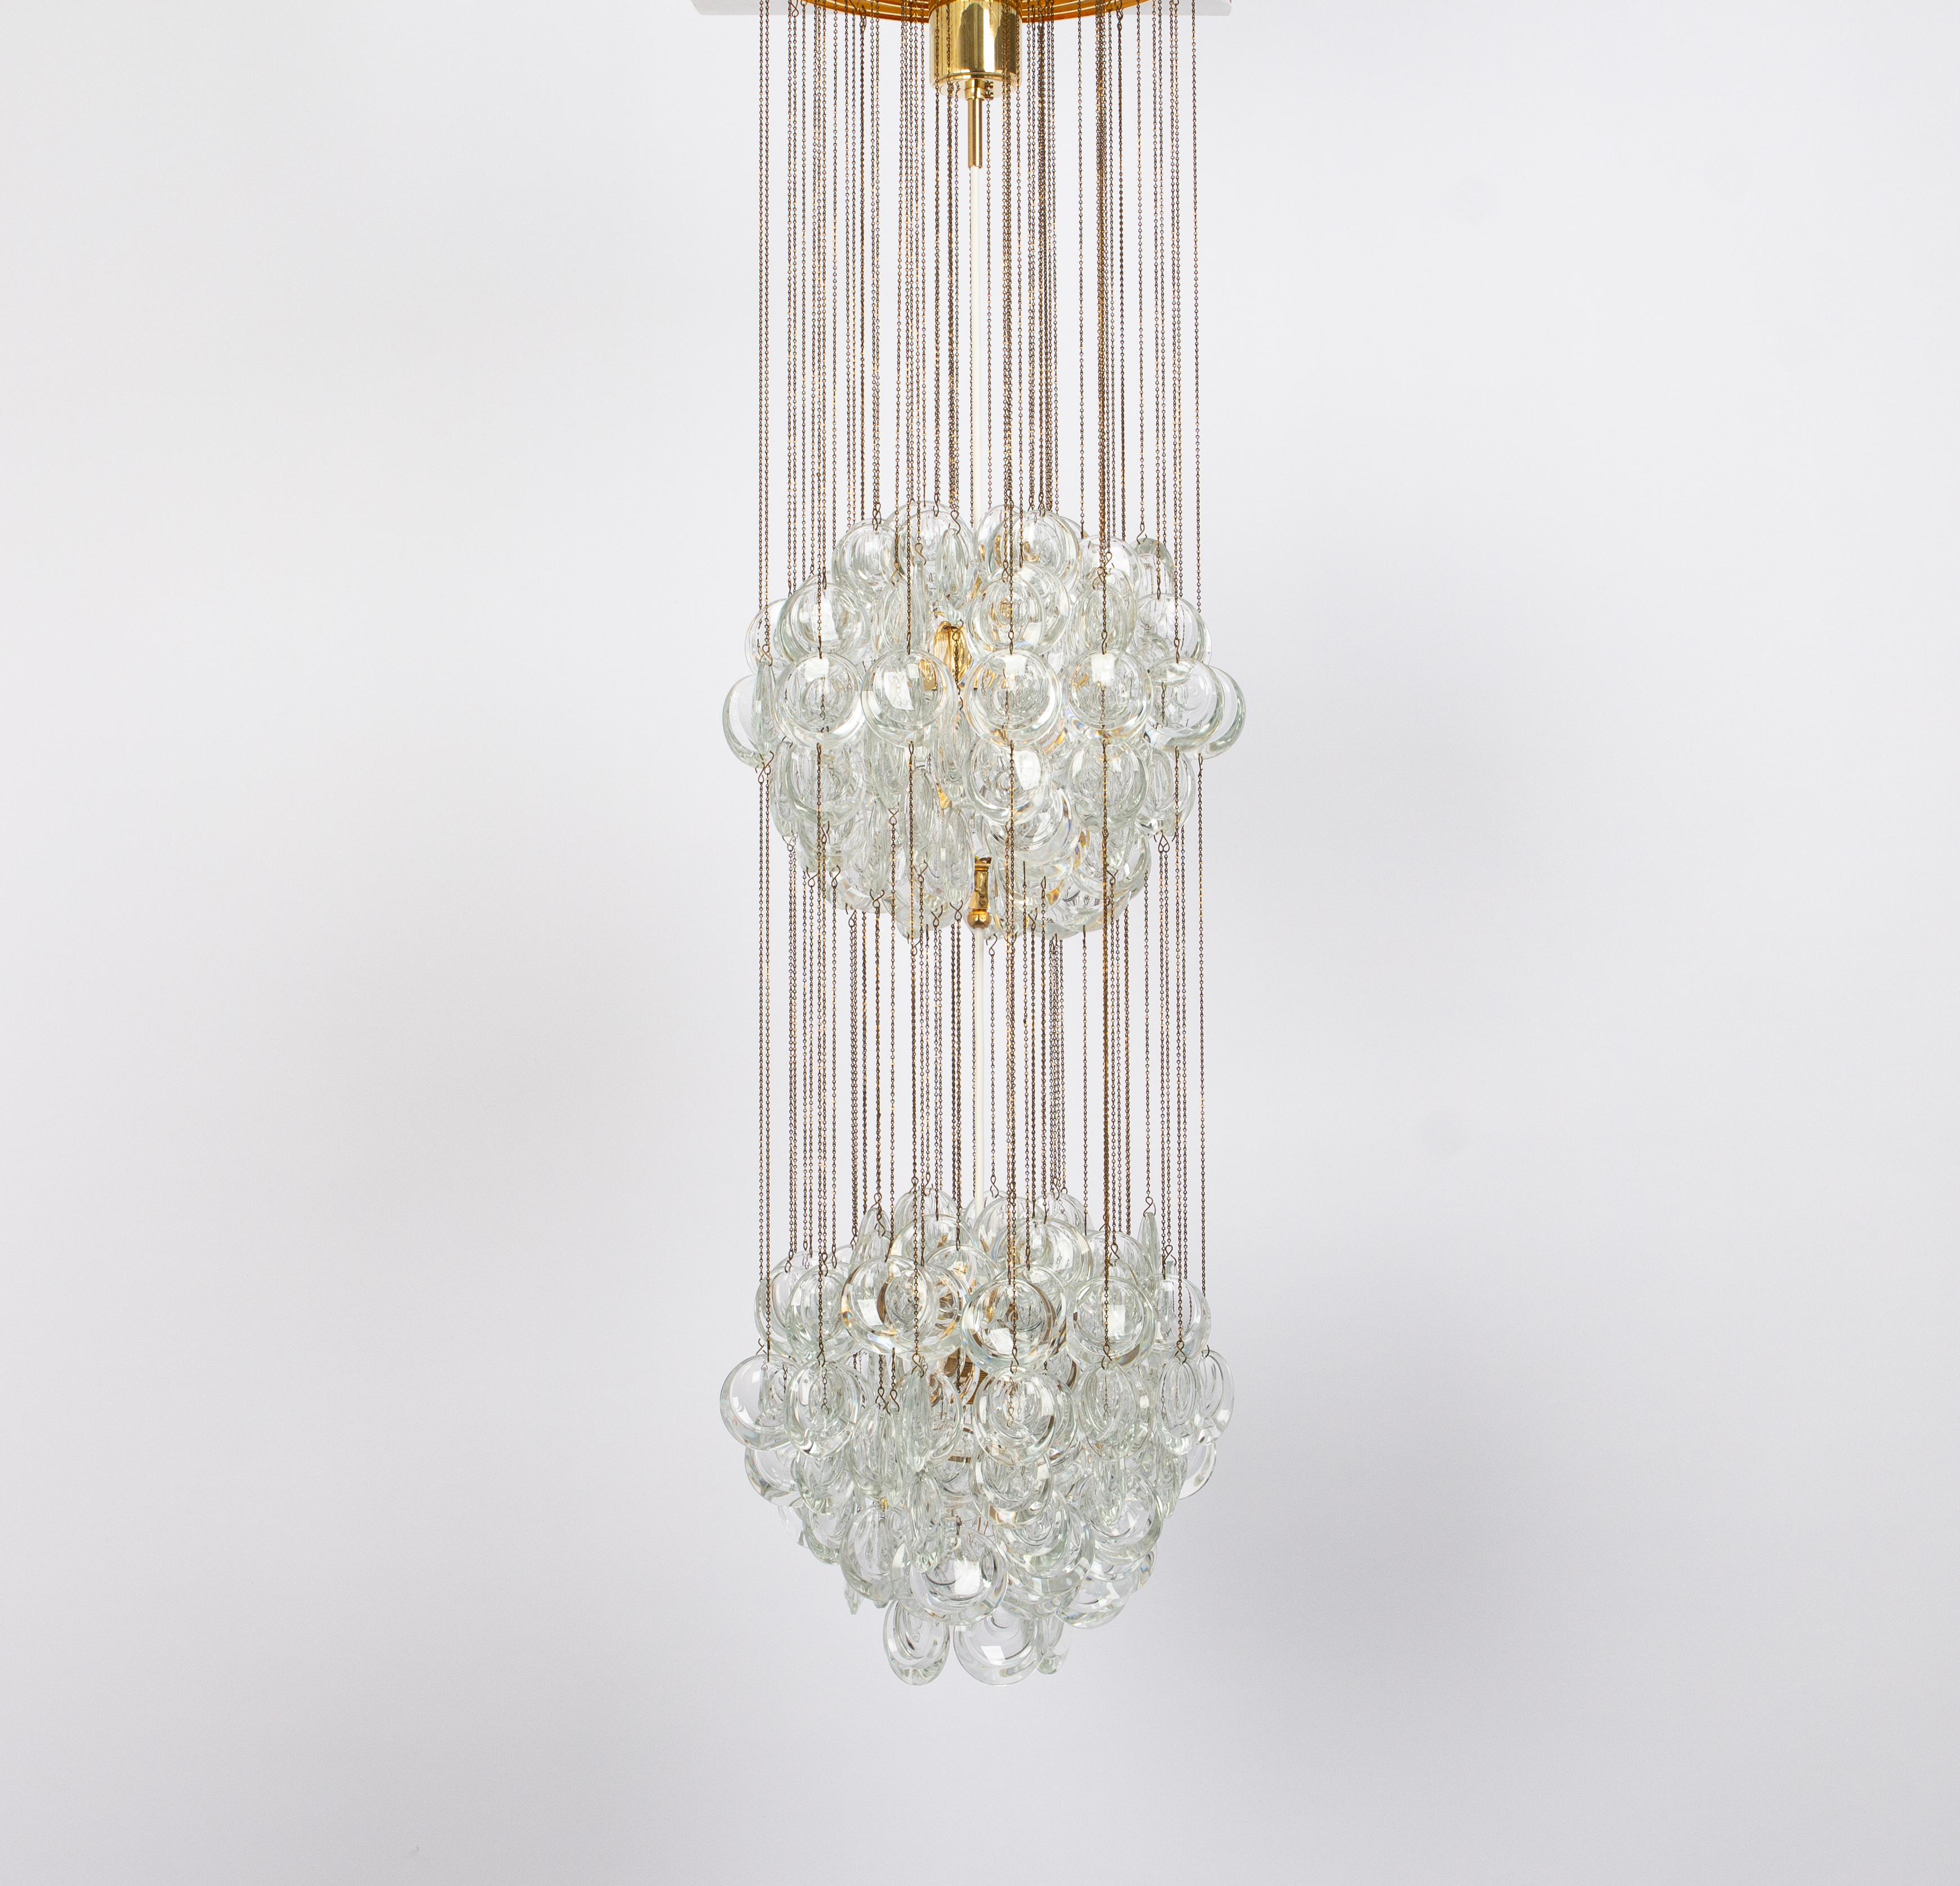 Delicate, rare chandelier with crystal glass and gilded brass parts made by Palwa, Sciolari Design Germany, 1970s. Featuring a multitude of crystal glasses.
A true masterpiece of artistry and elegance. This magnificent lighting fixture transcends